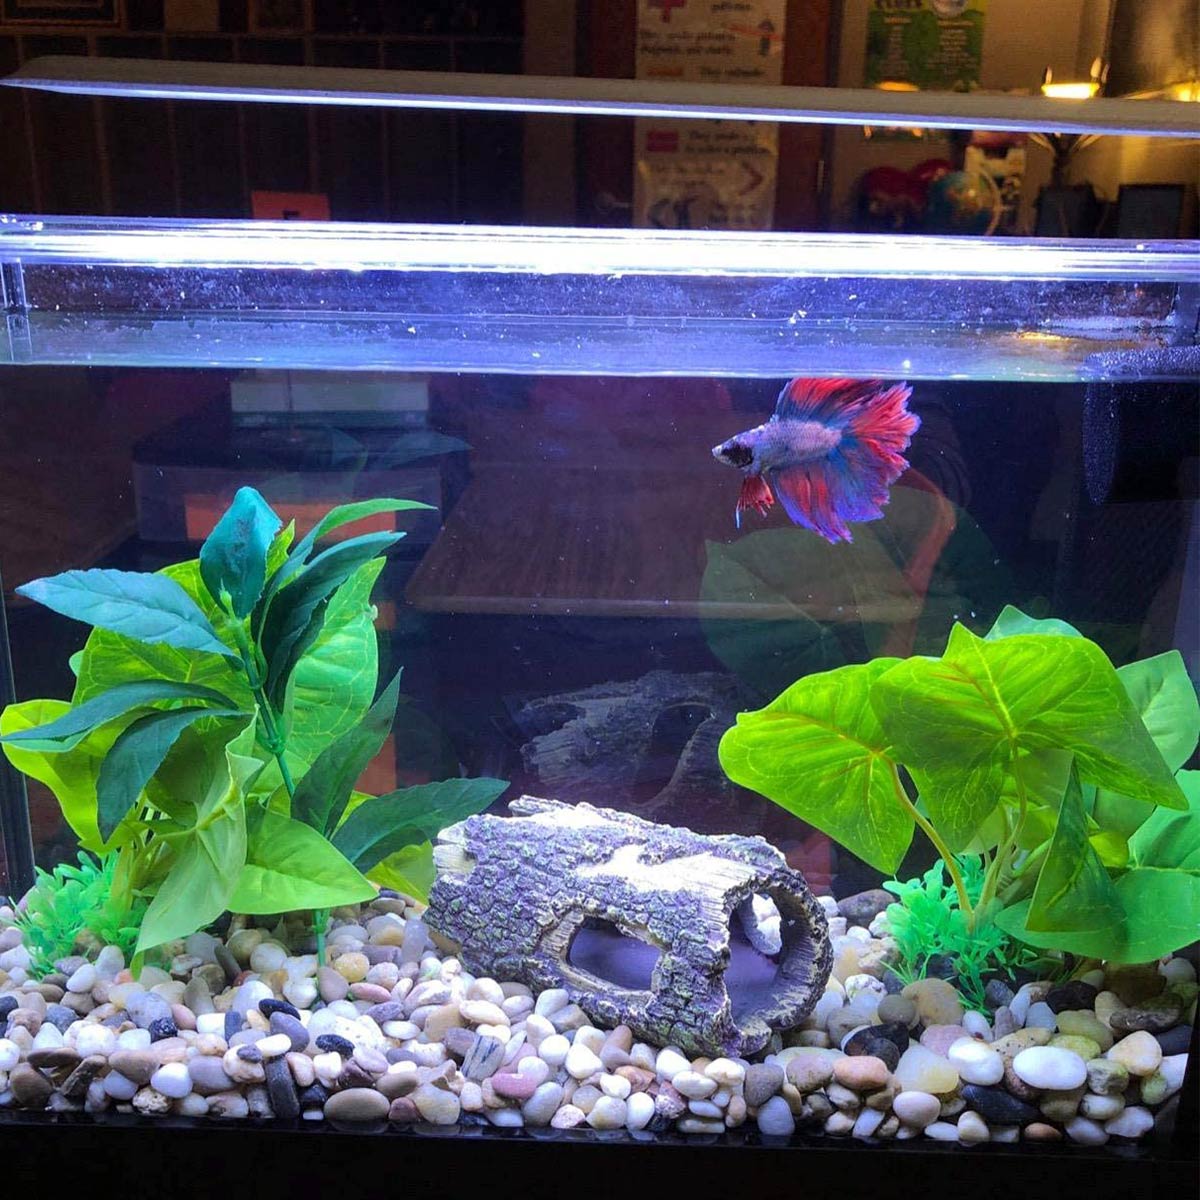 Beautifully decorated Betta fish tank with optimal lighting and water conditions